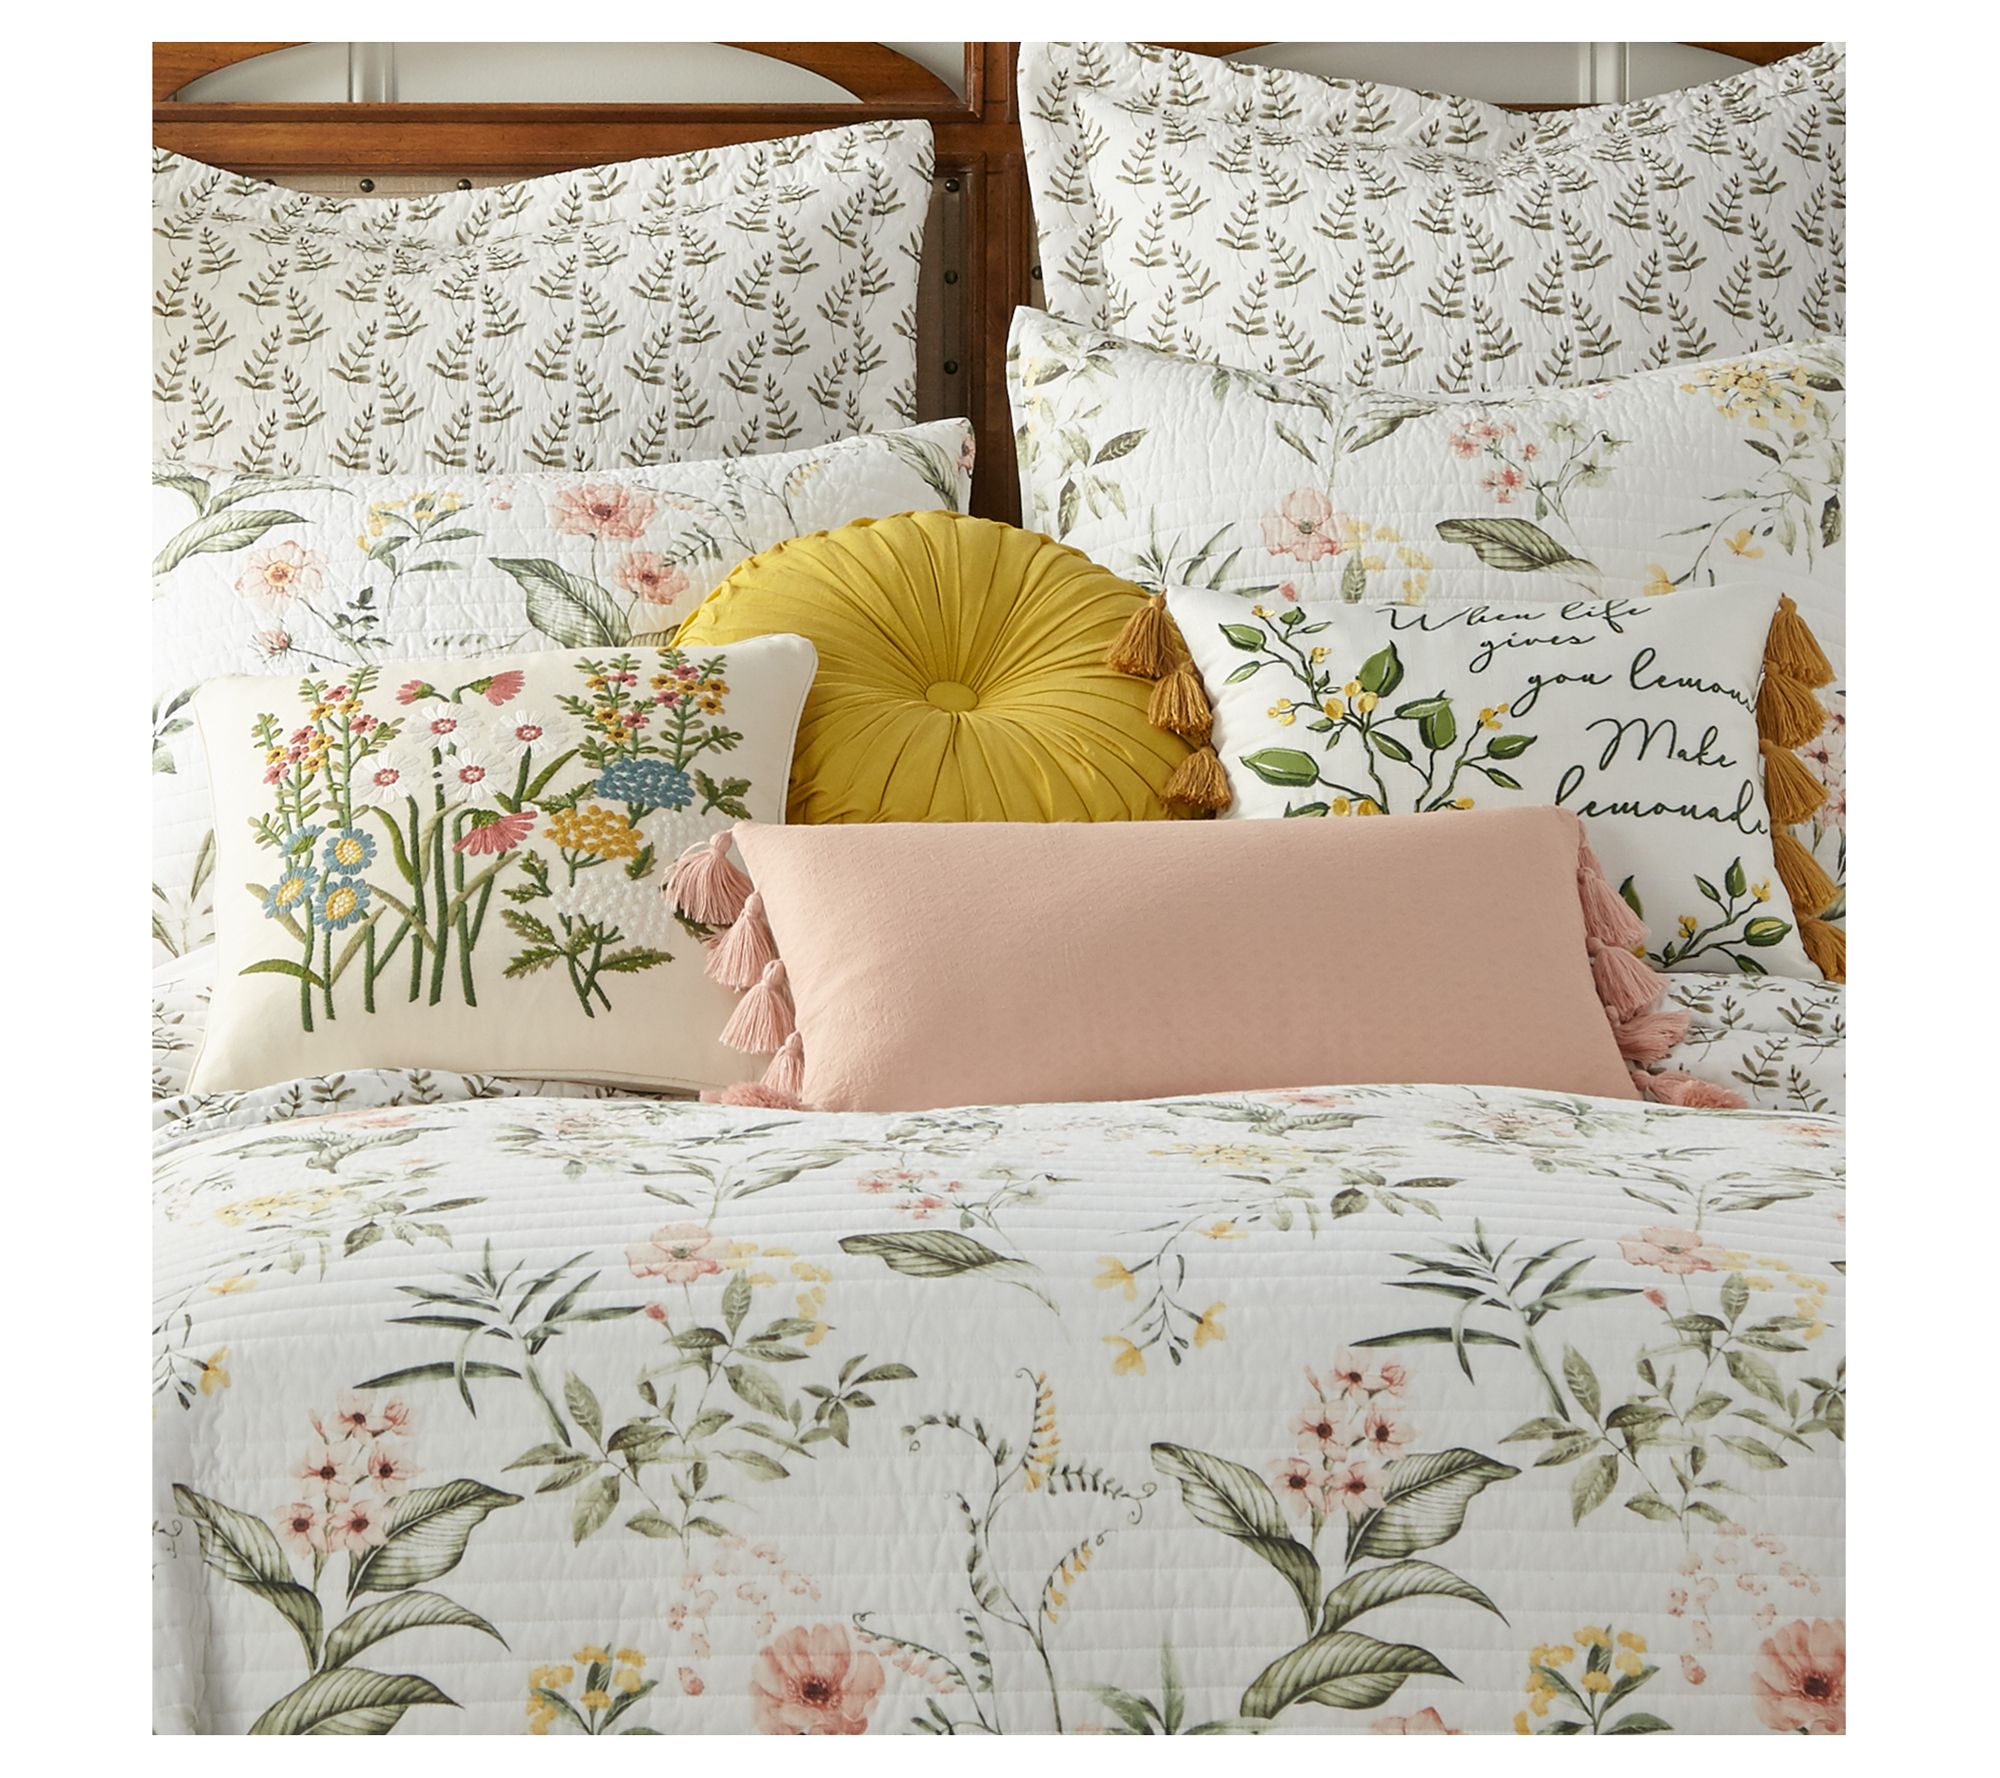 Levtex Home Floral 3 Piece Quilt Sets, Full/Queen with Pillow Shams 